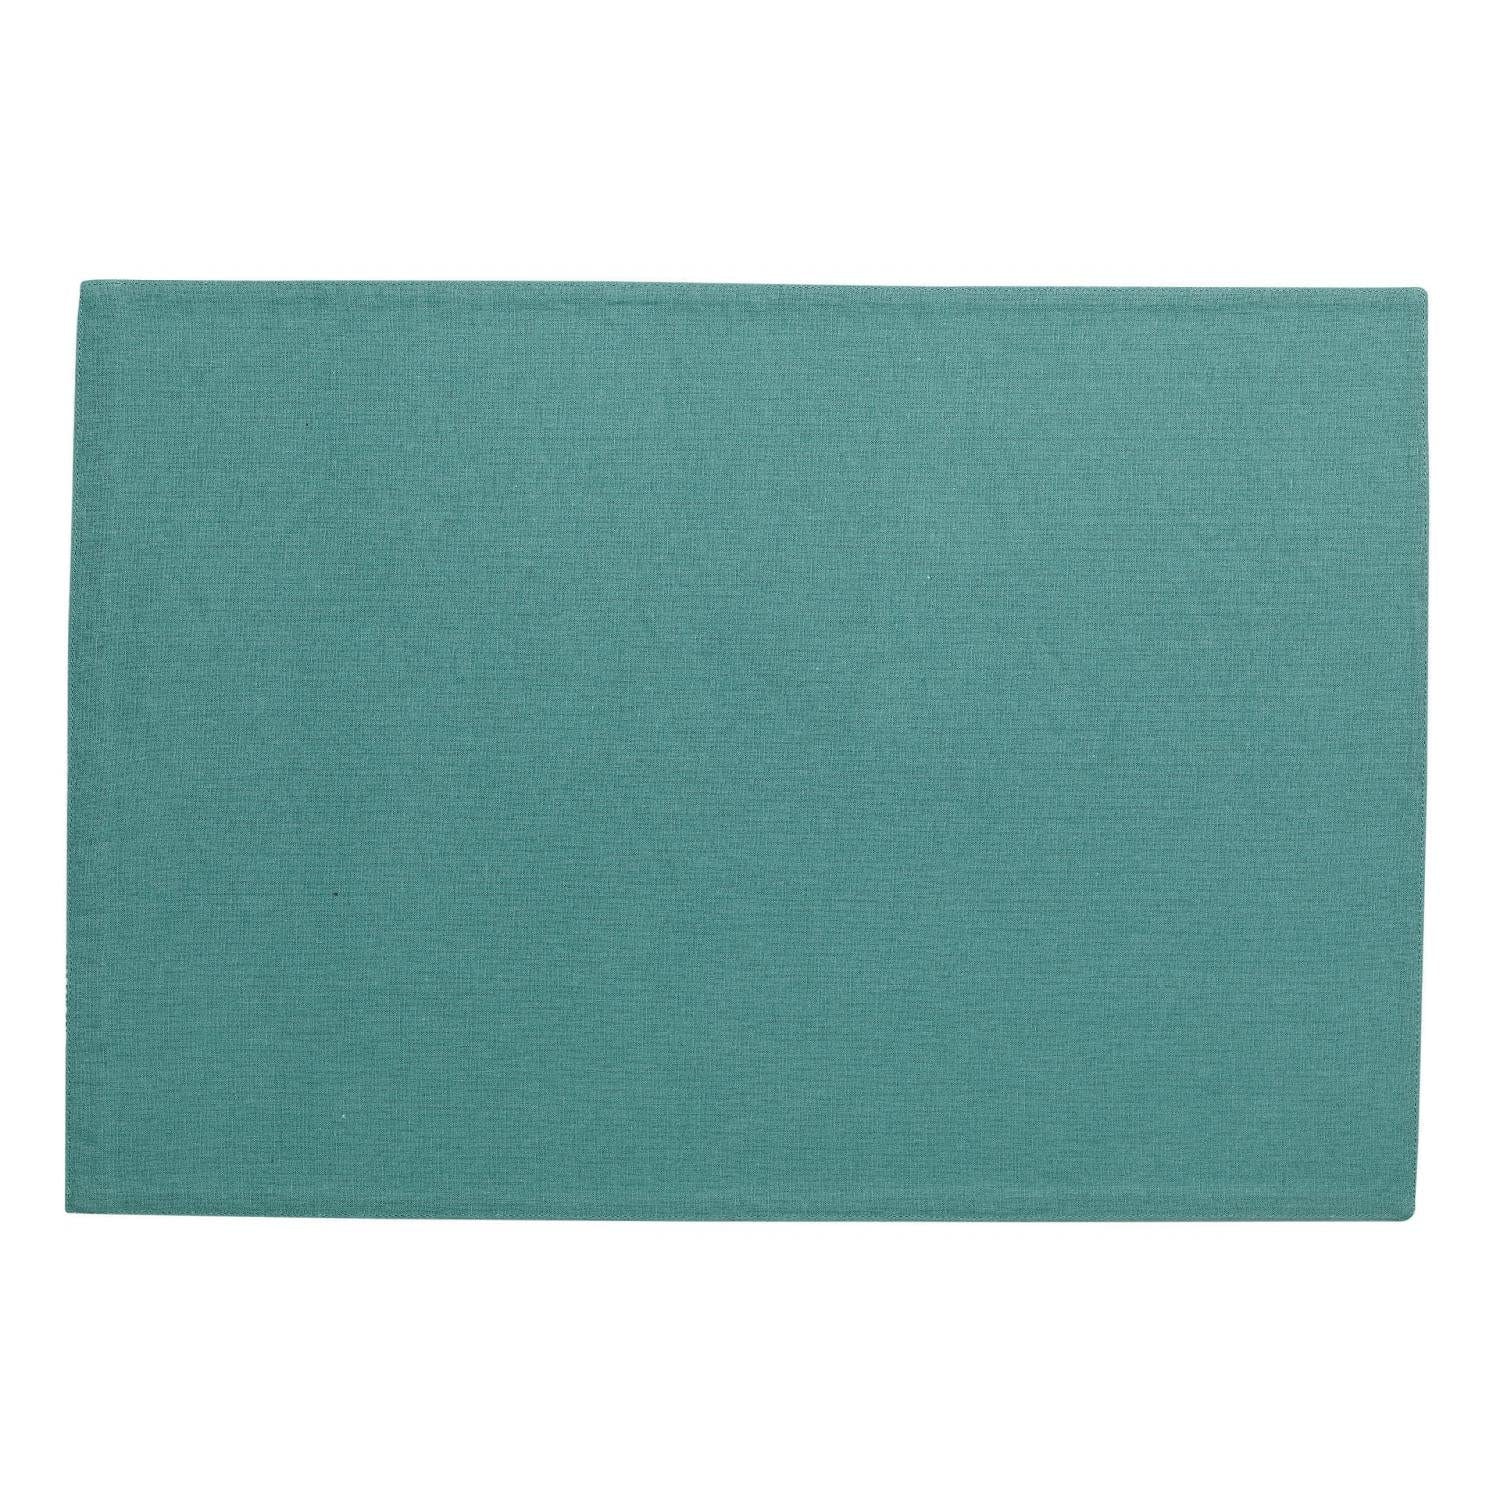 Calypse Placemat Peacock (Paon), Set of 2